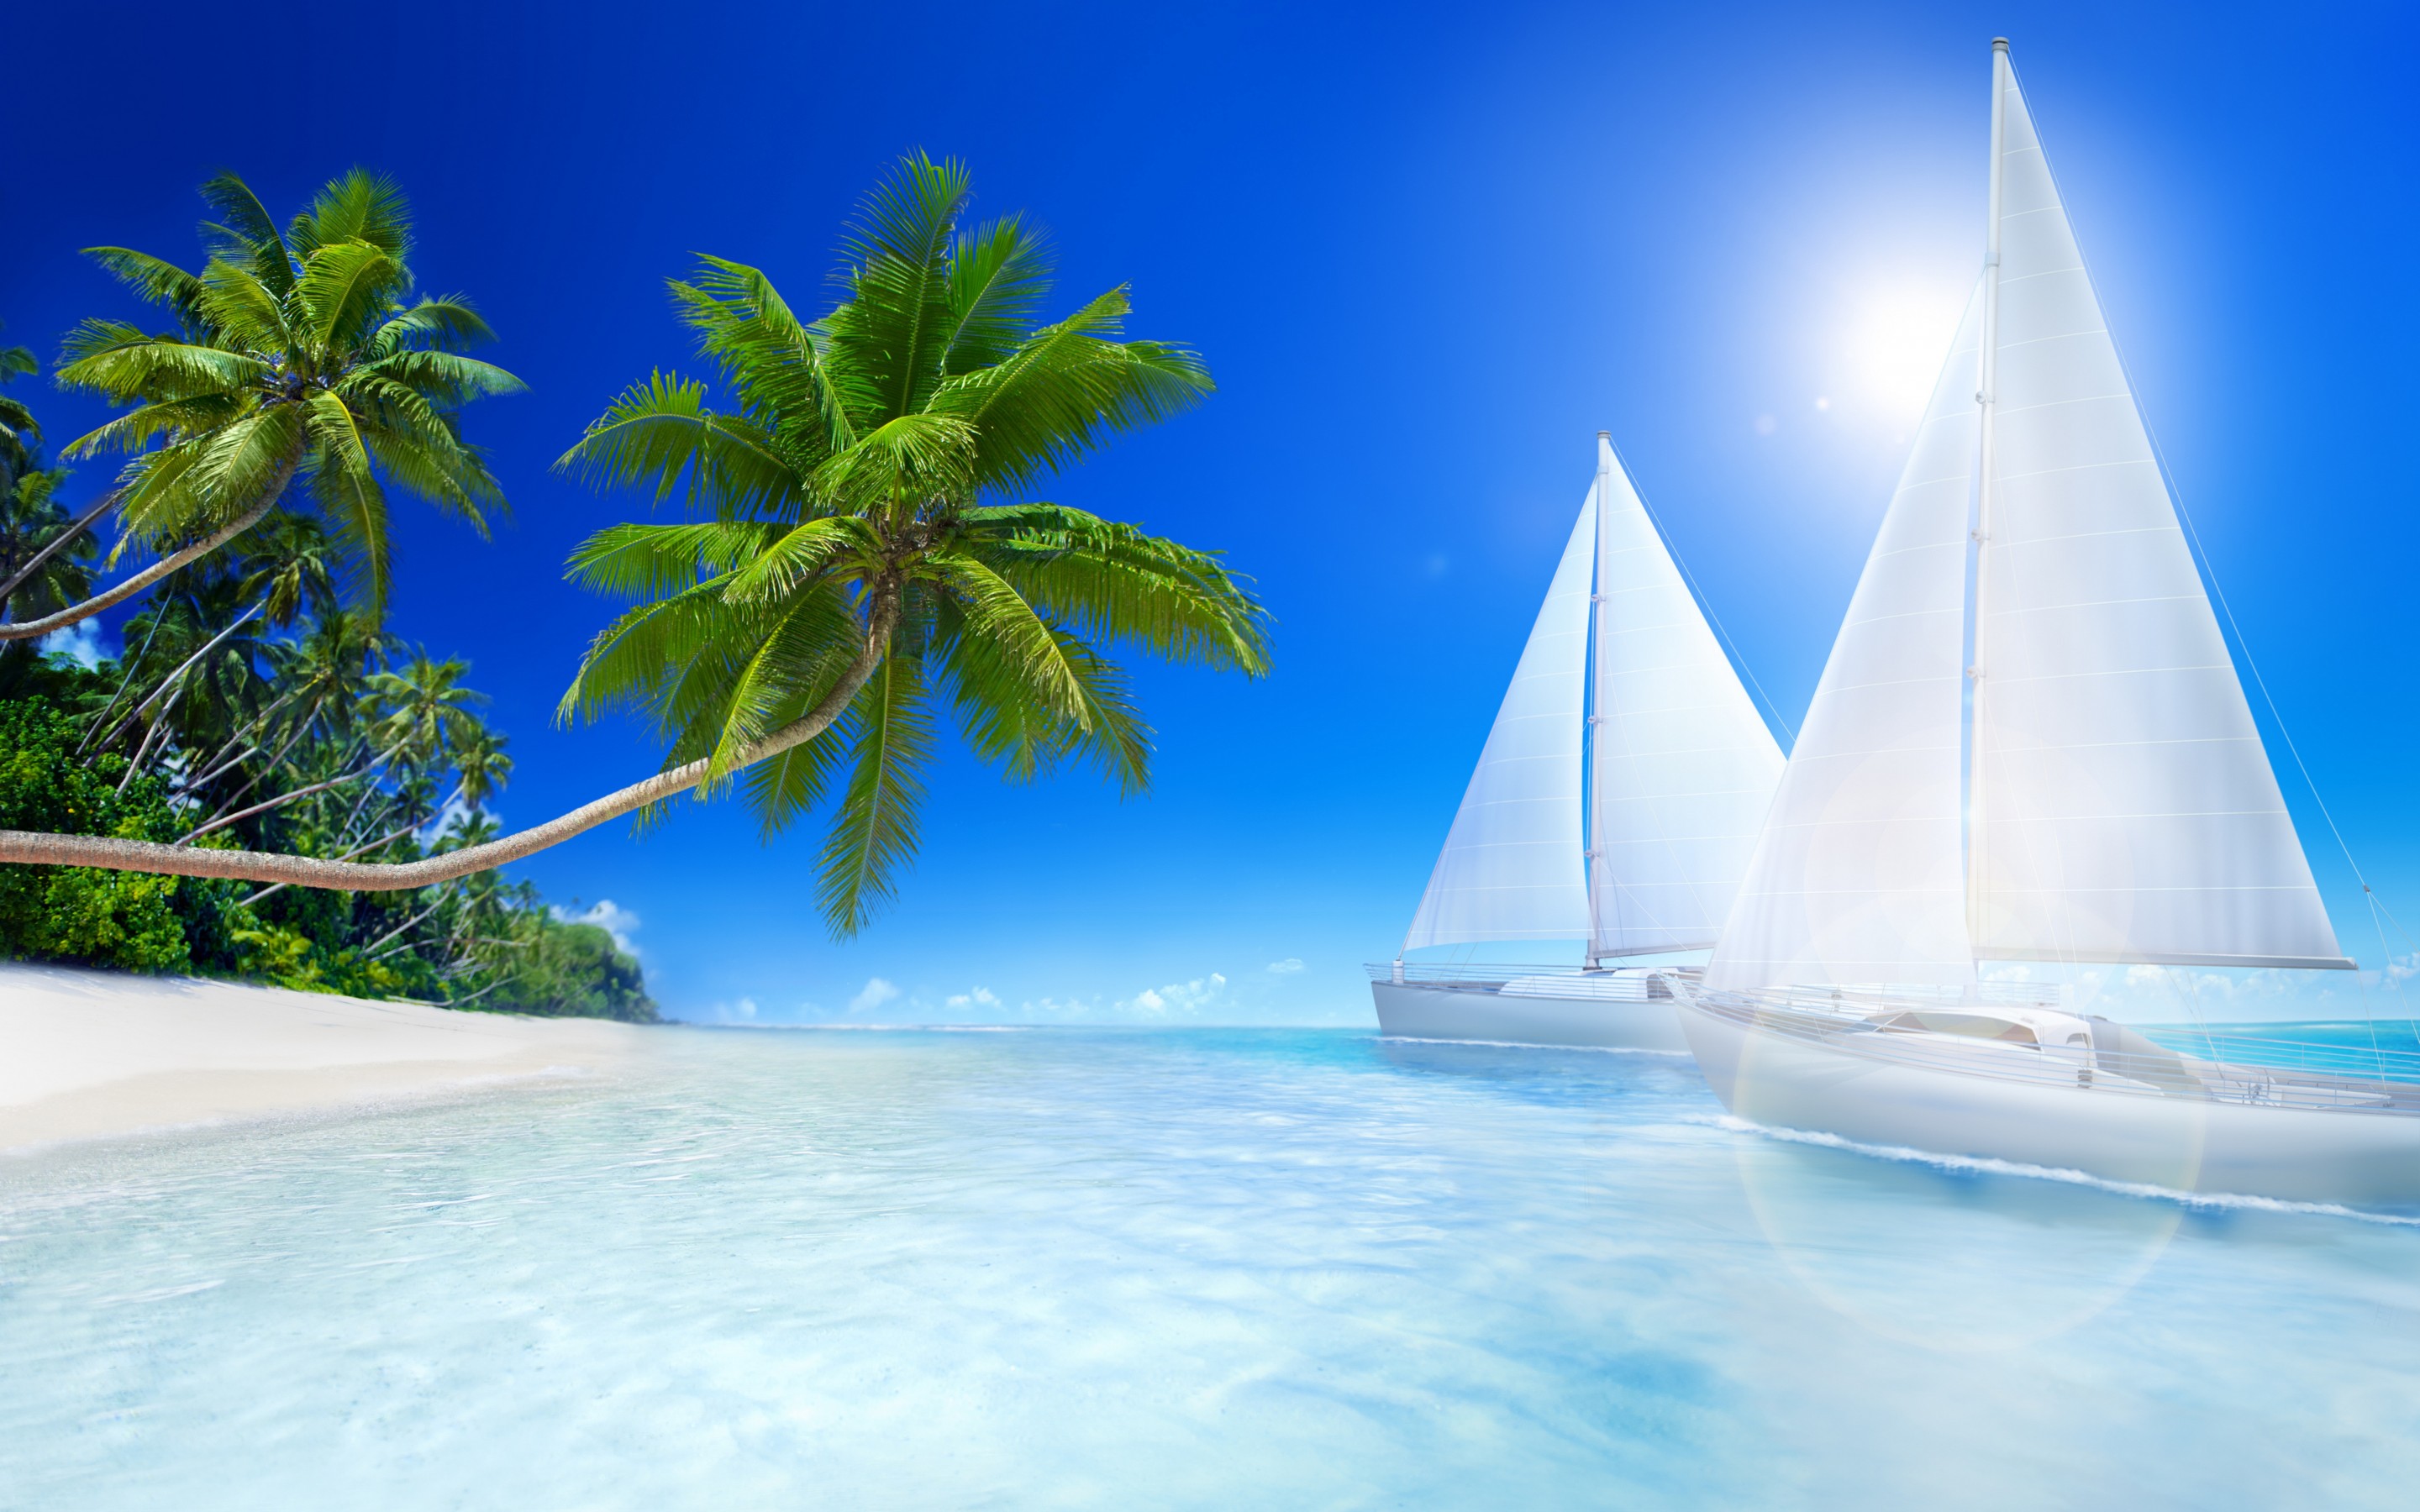 Download this Tropical Oasis wallpapers and place them on your